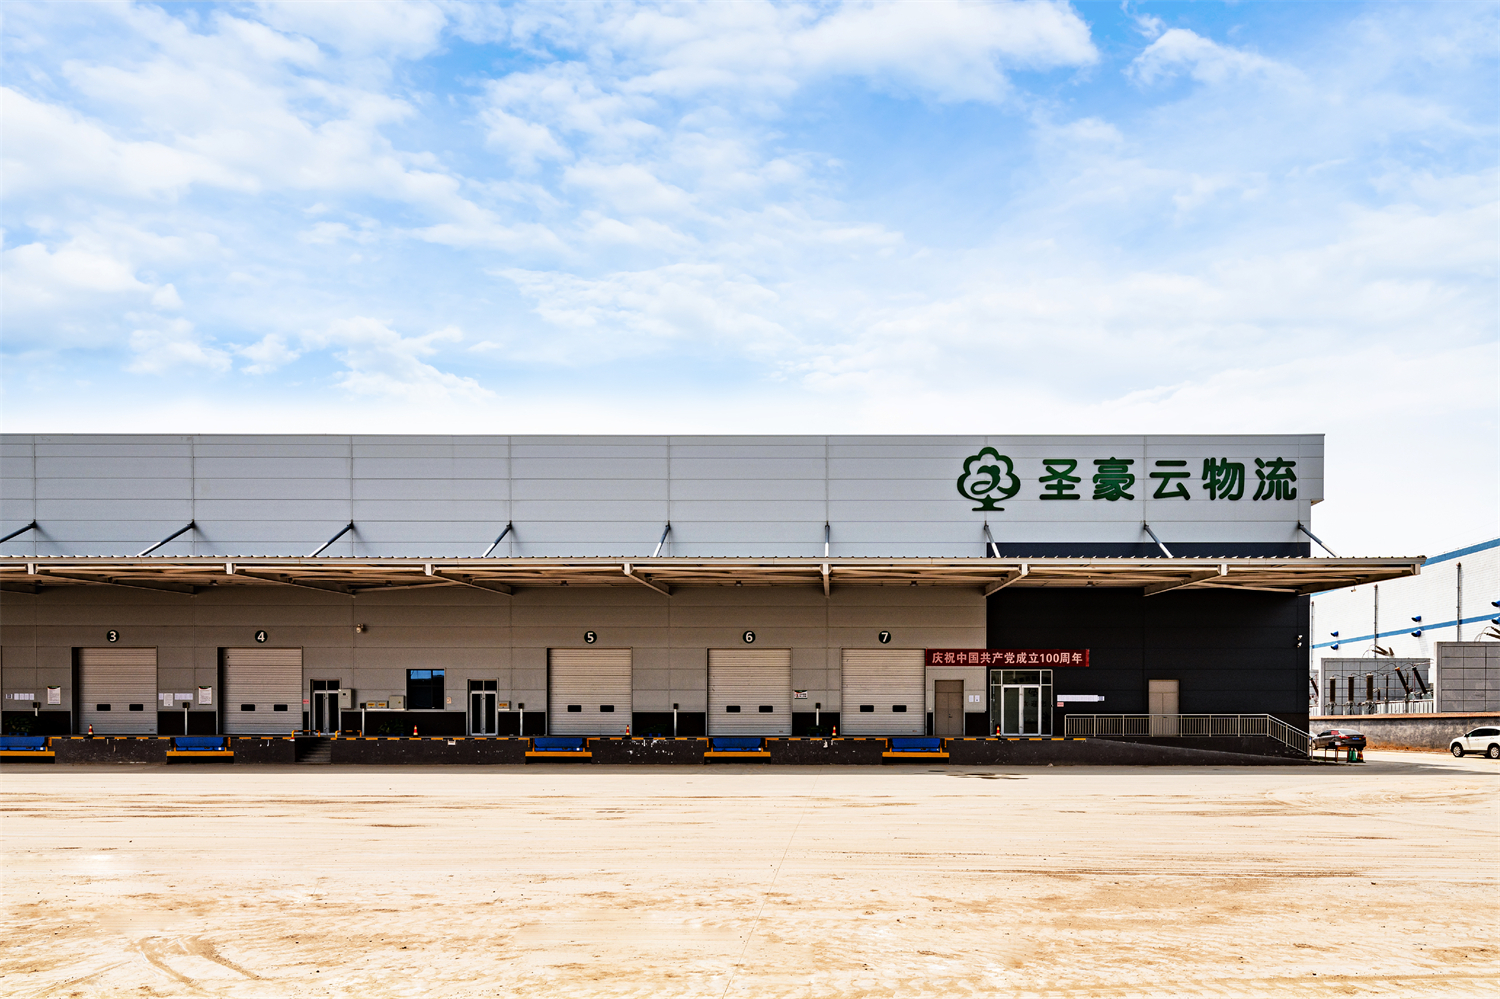 With equal emphasis on function and beauty, green building materials help the construction of logistics center(图11)